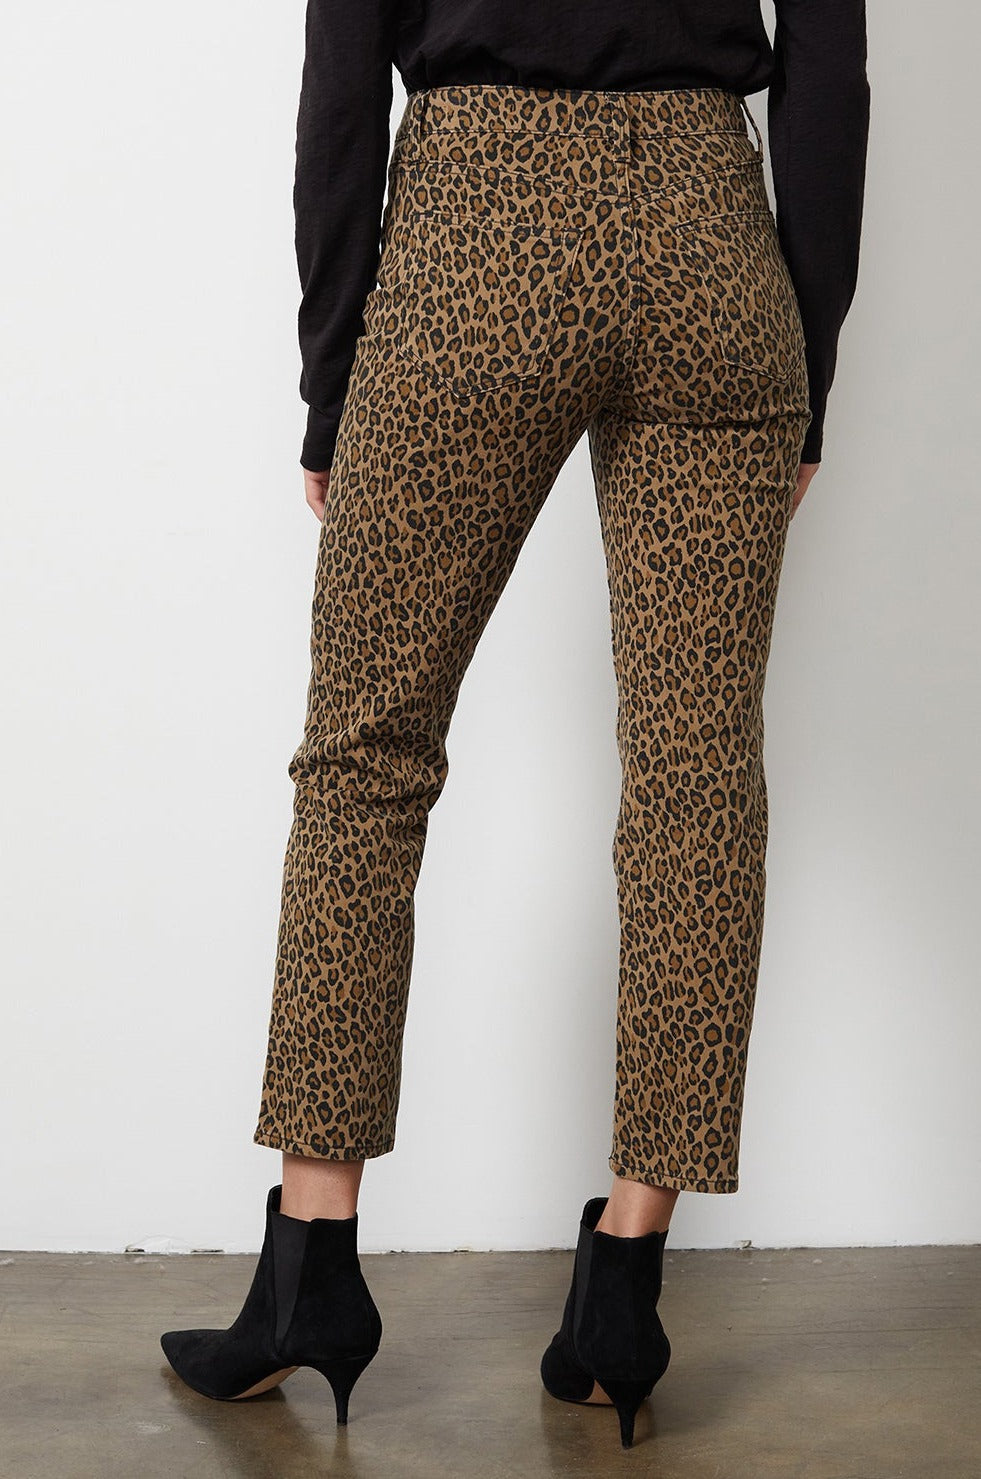 The back view of a woman wearing Velvet by Graham & Spencer leopard print cropped ankle pants.-8209813209169